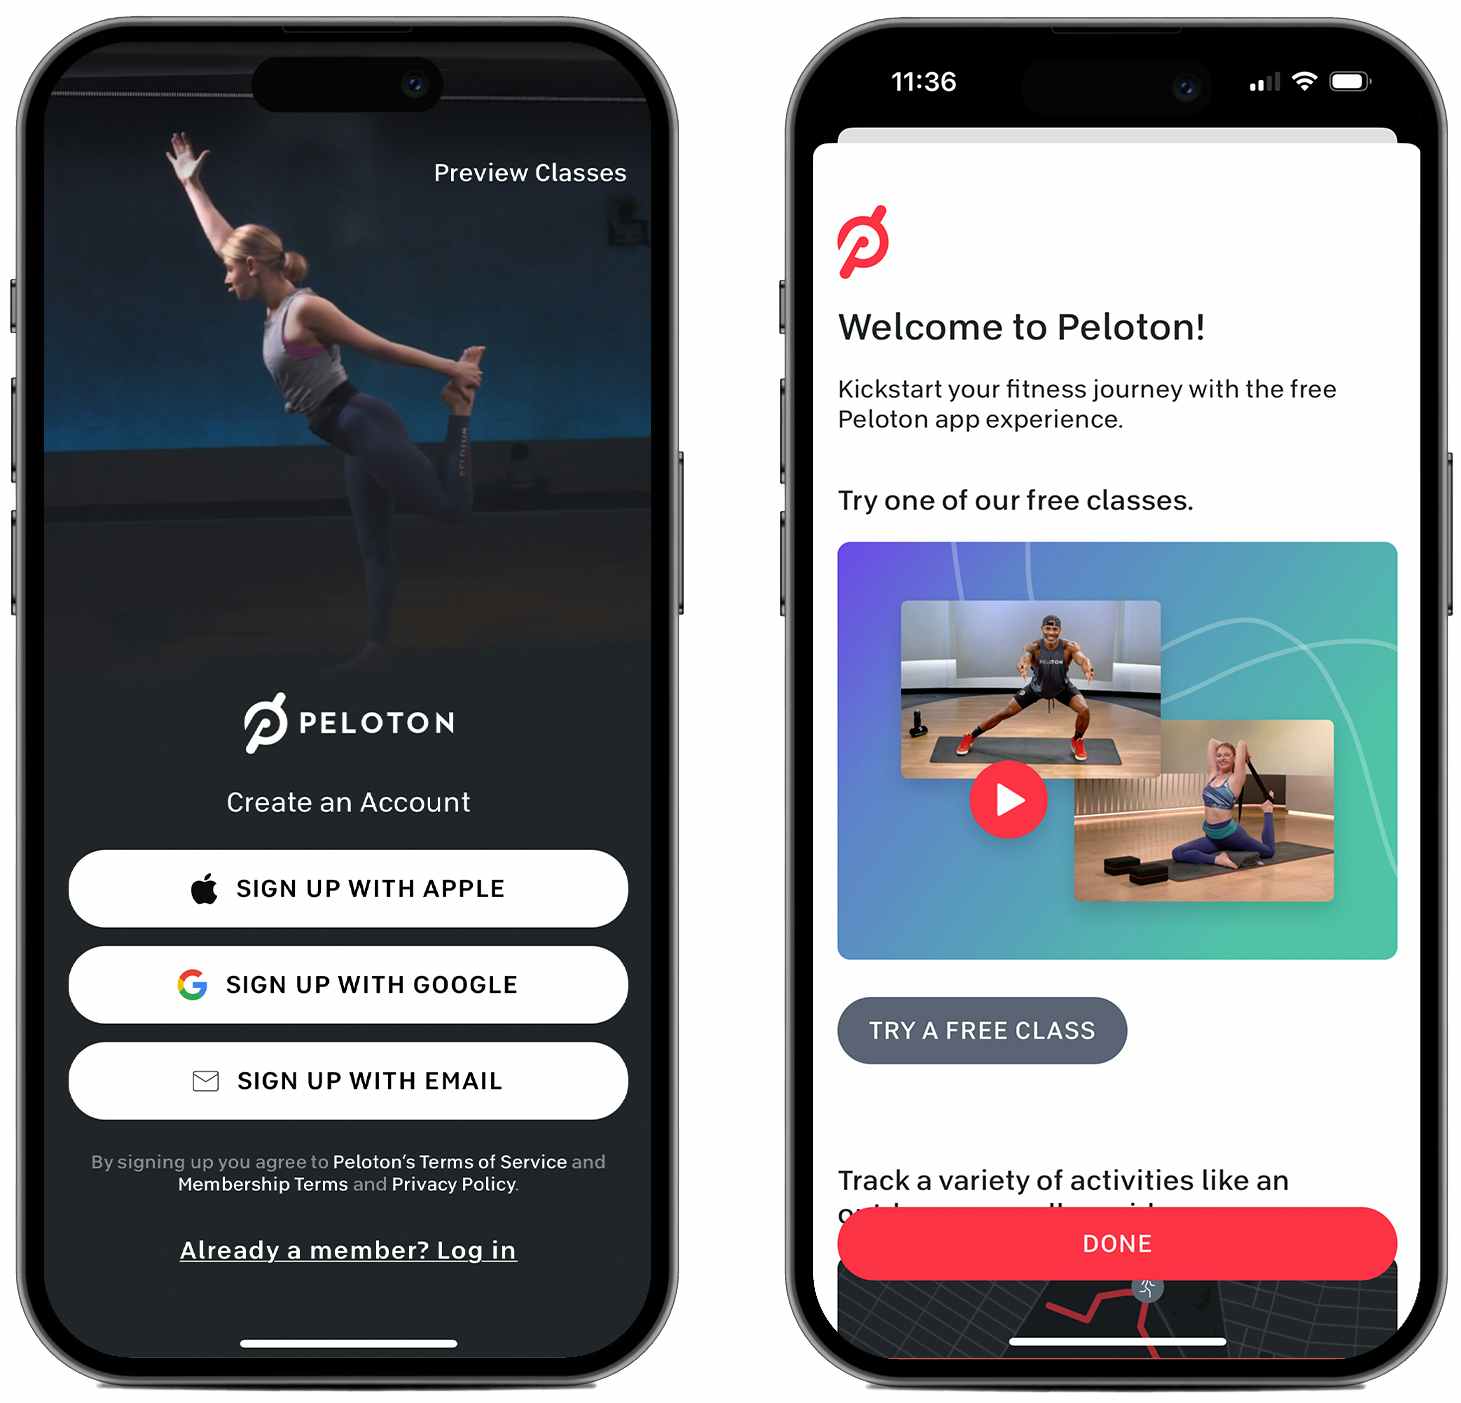 Screenshots from the Peloton fitness app on two iPhone screens